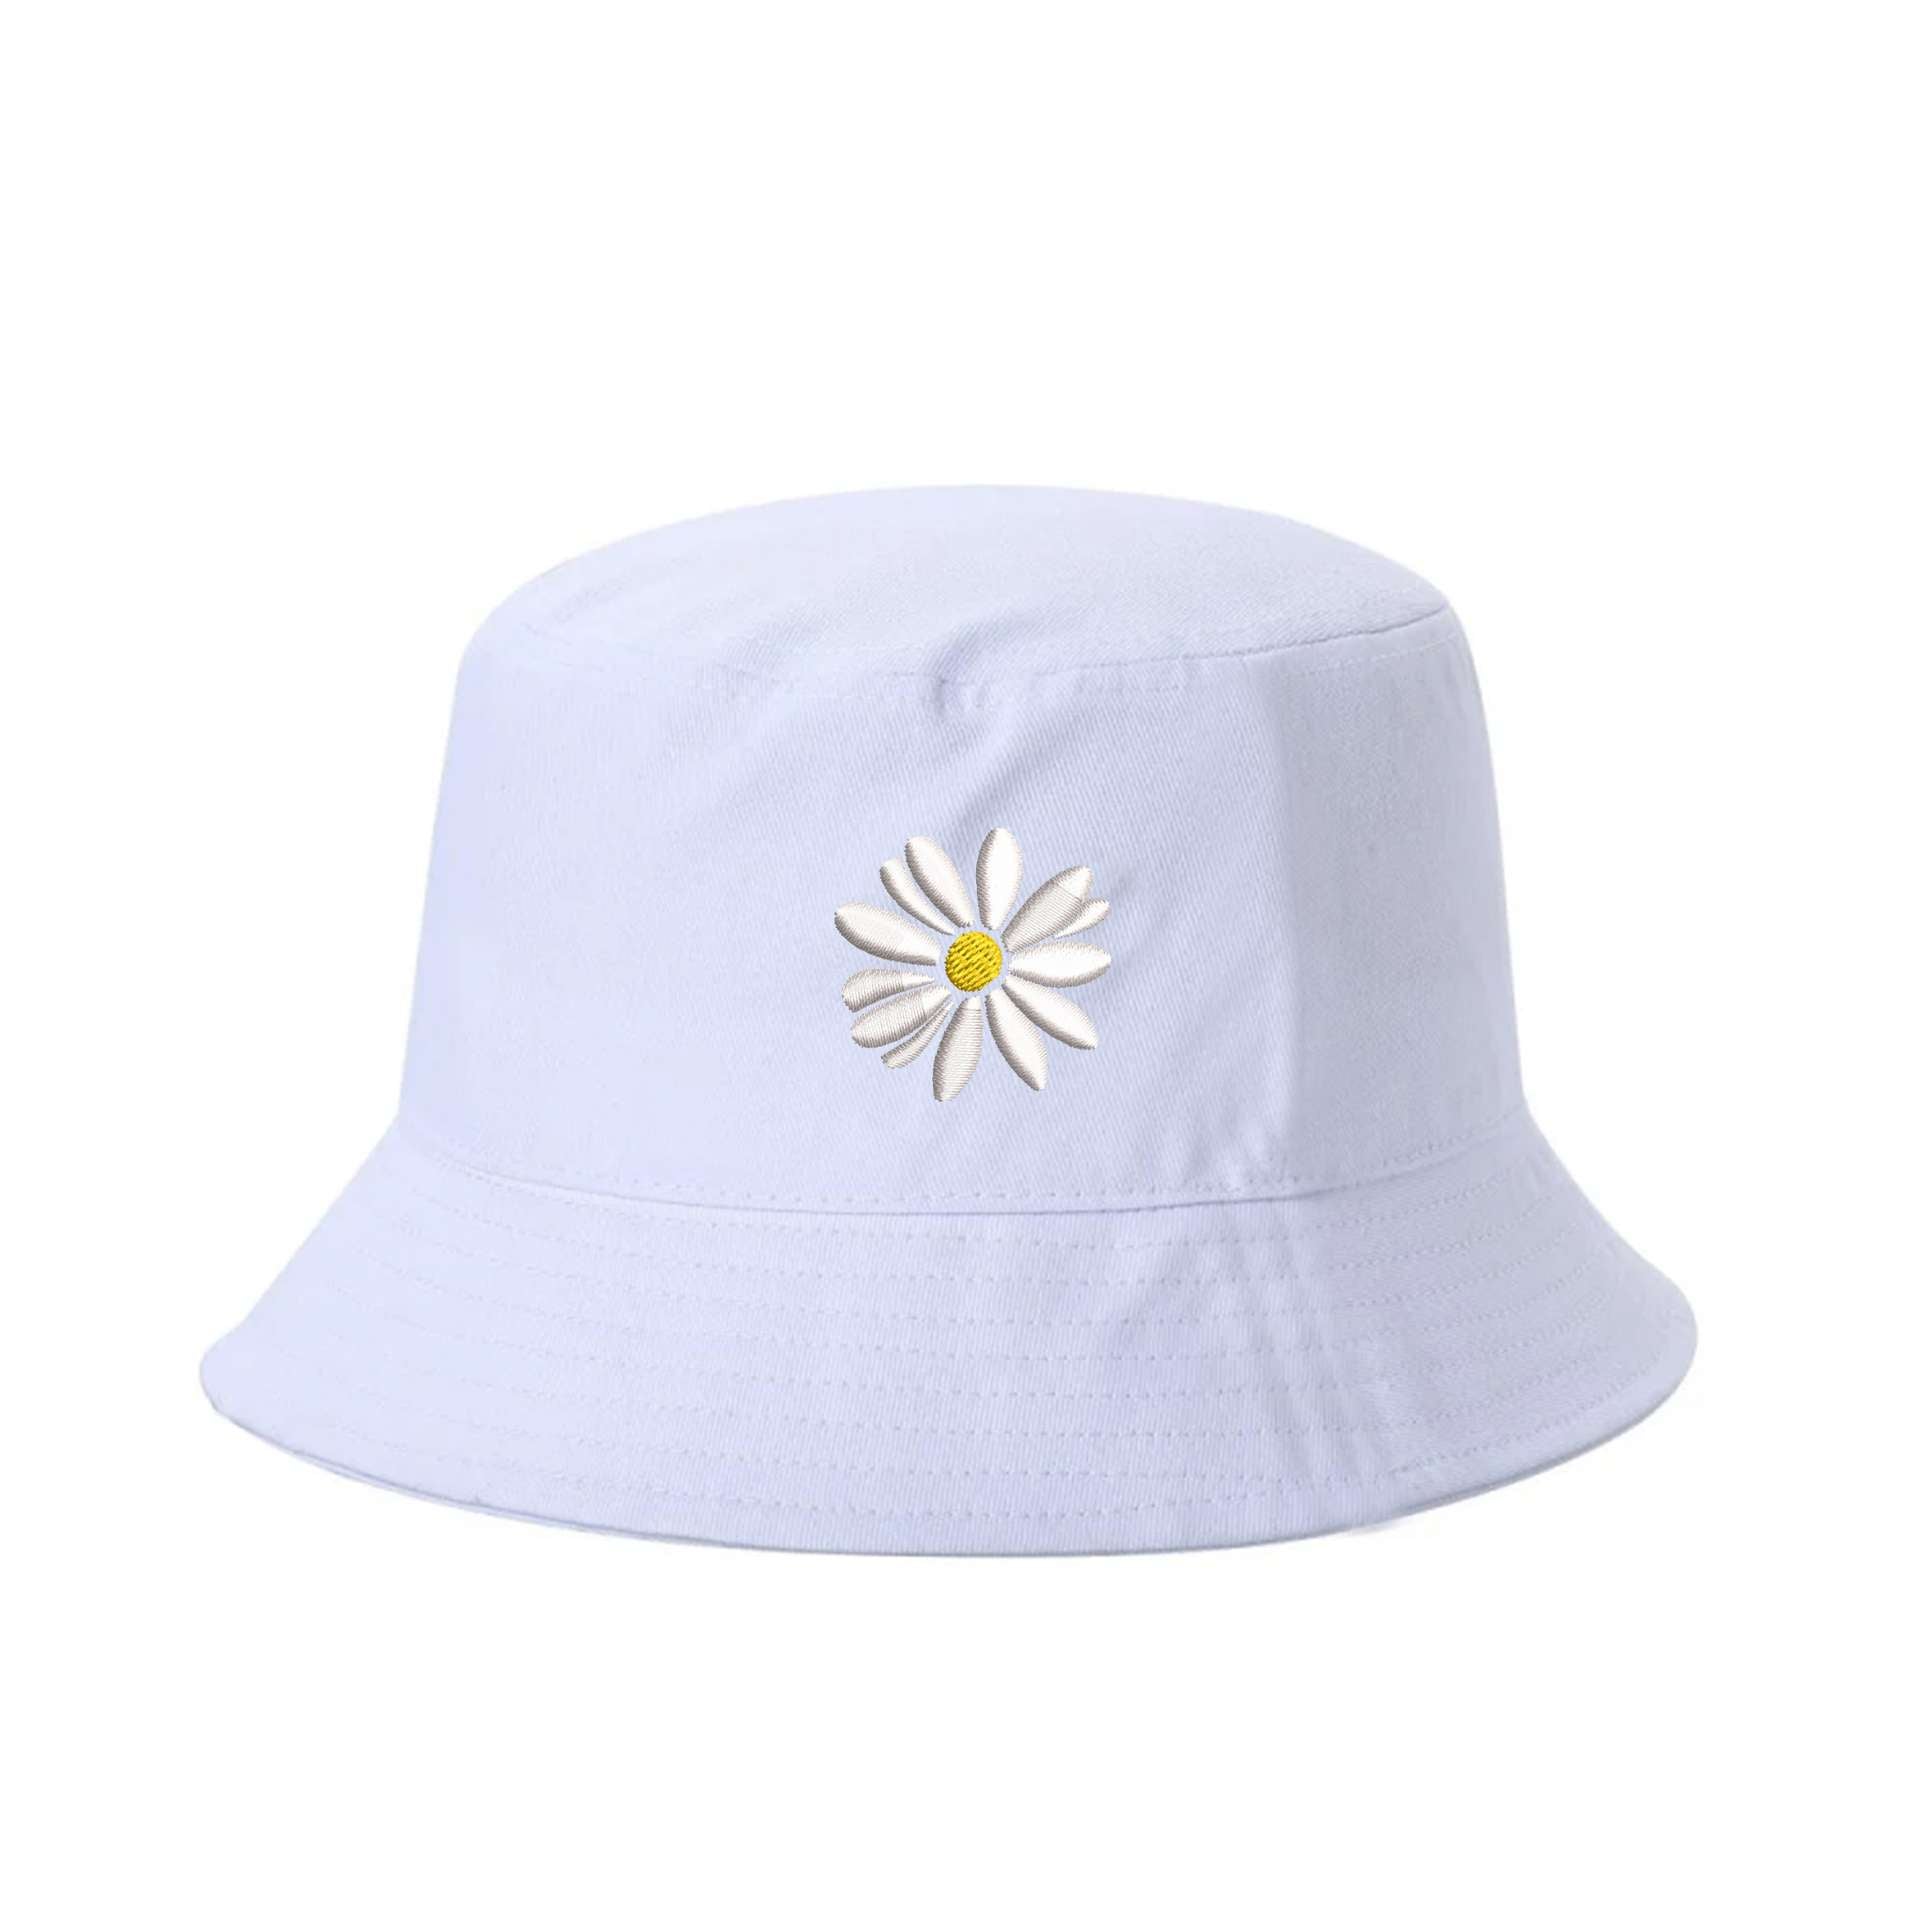 White Bucket hat embroidered with a daisy flower - DSY Lifestyle